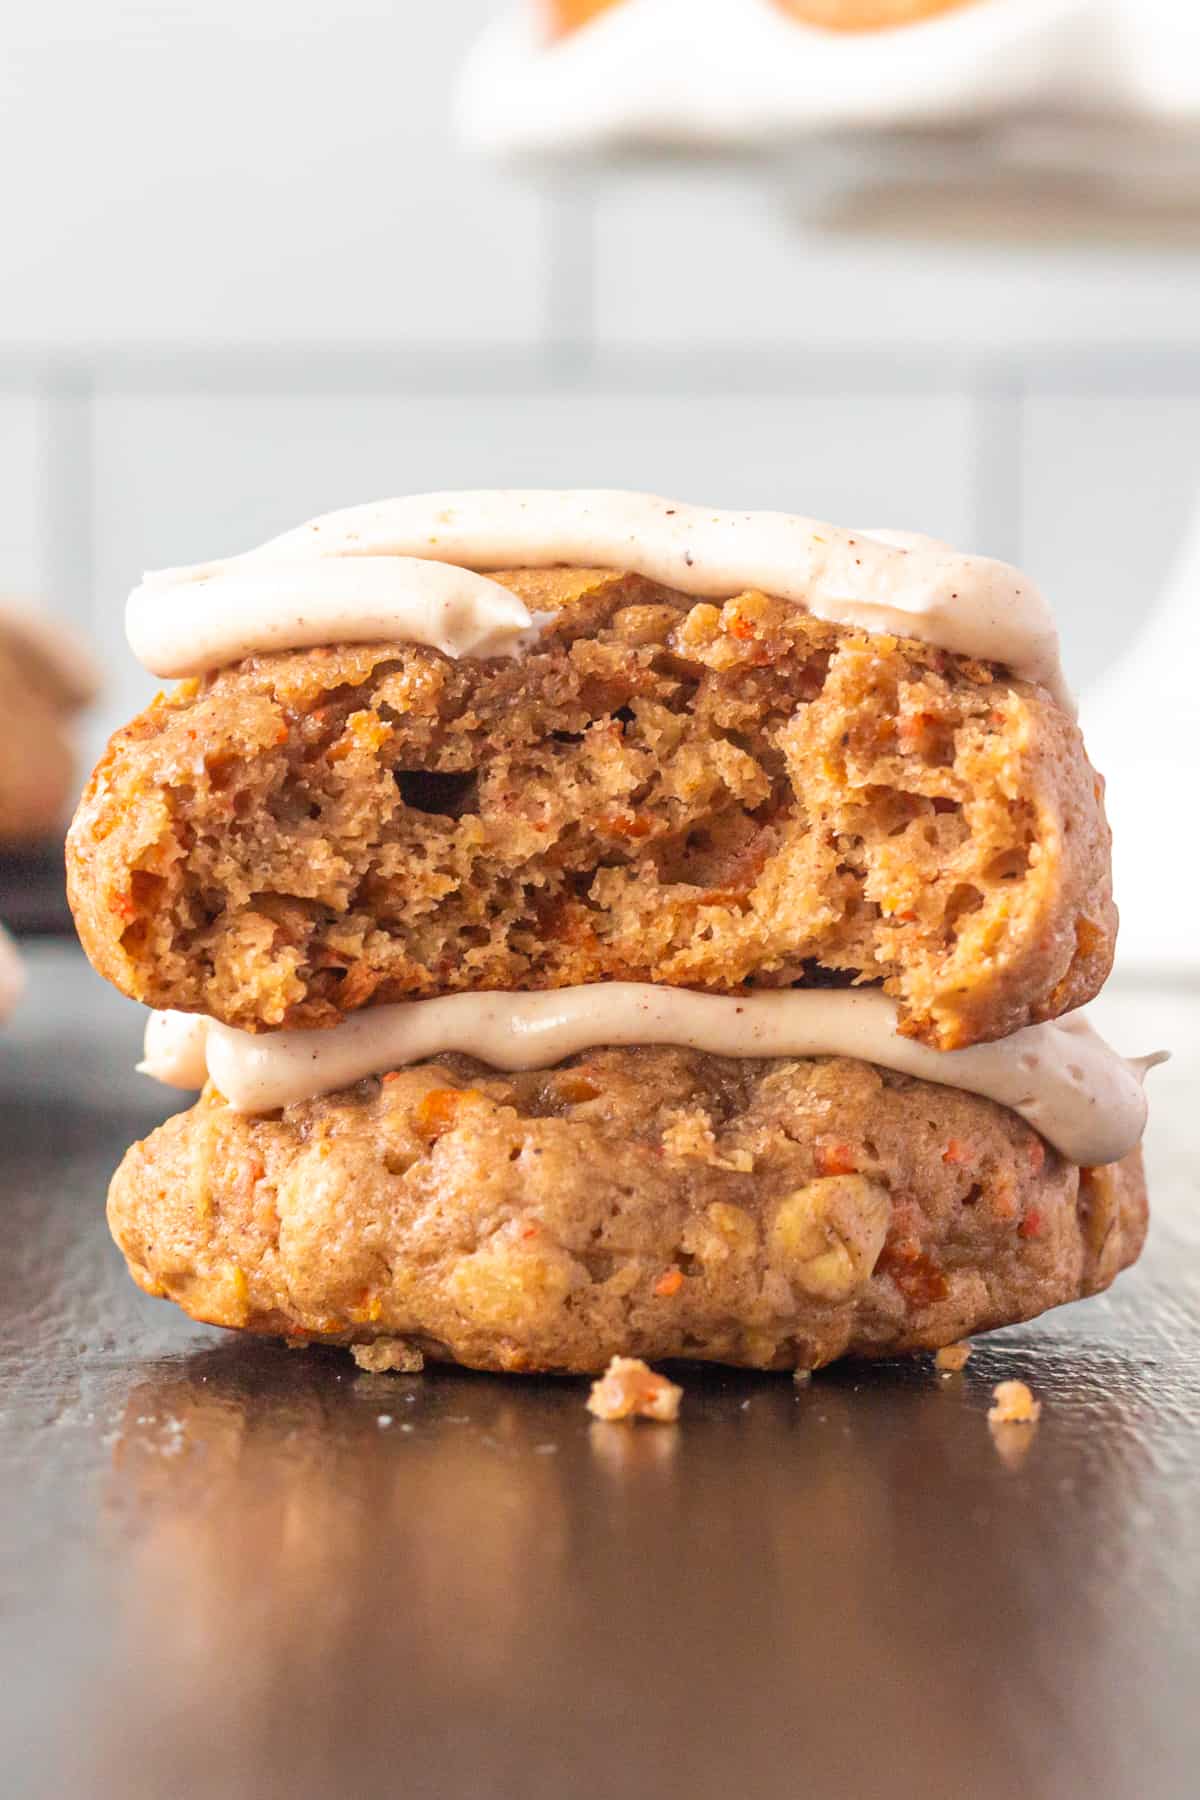 Thick and chewy carrot cake cookies with a bite taken out to show thick, chewy texture.